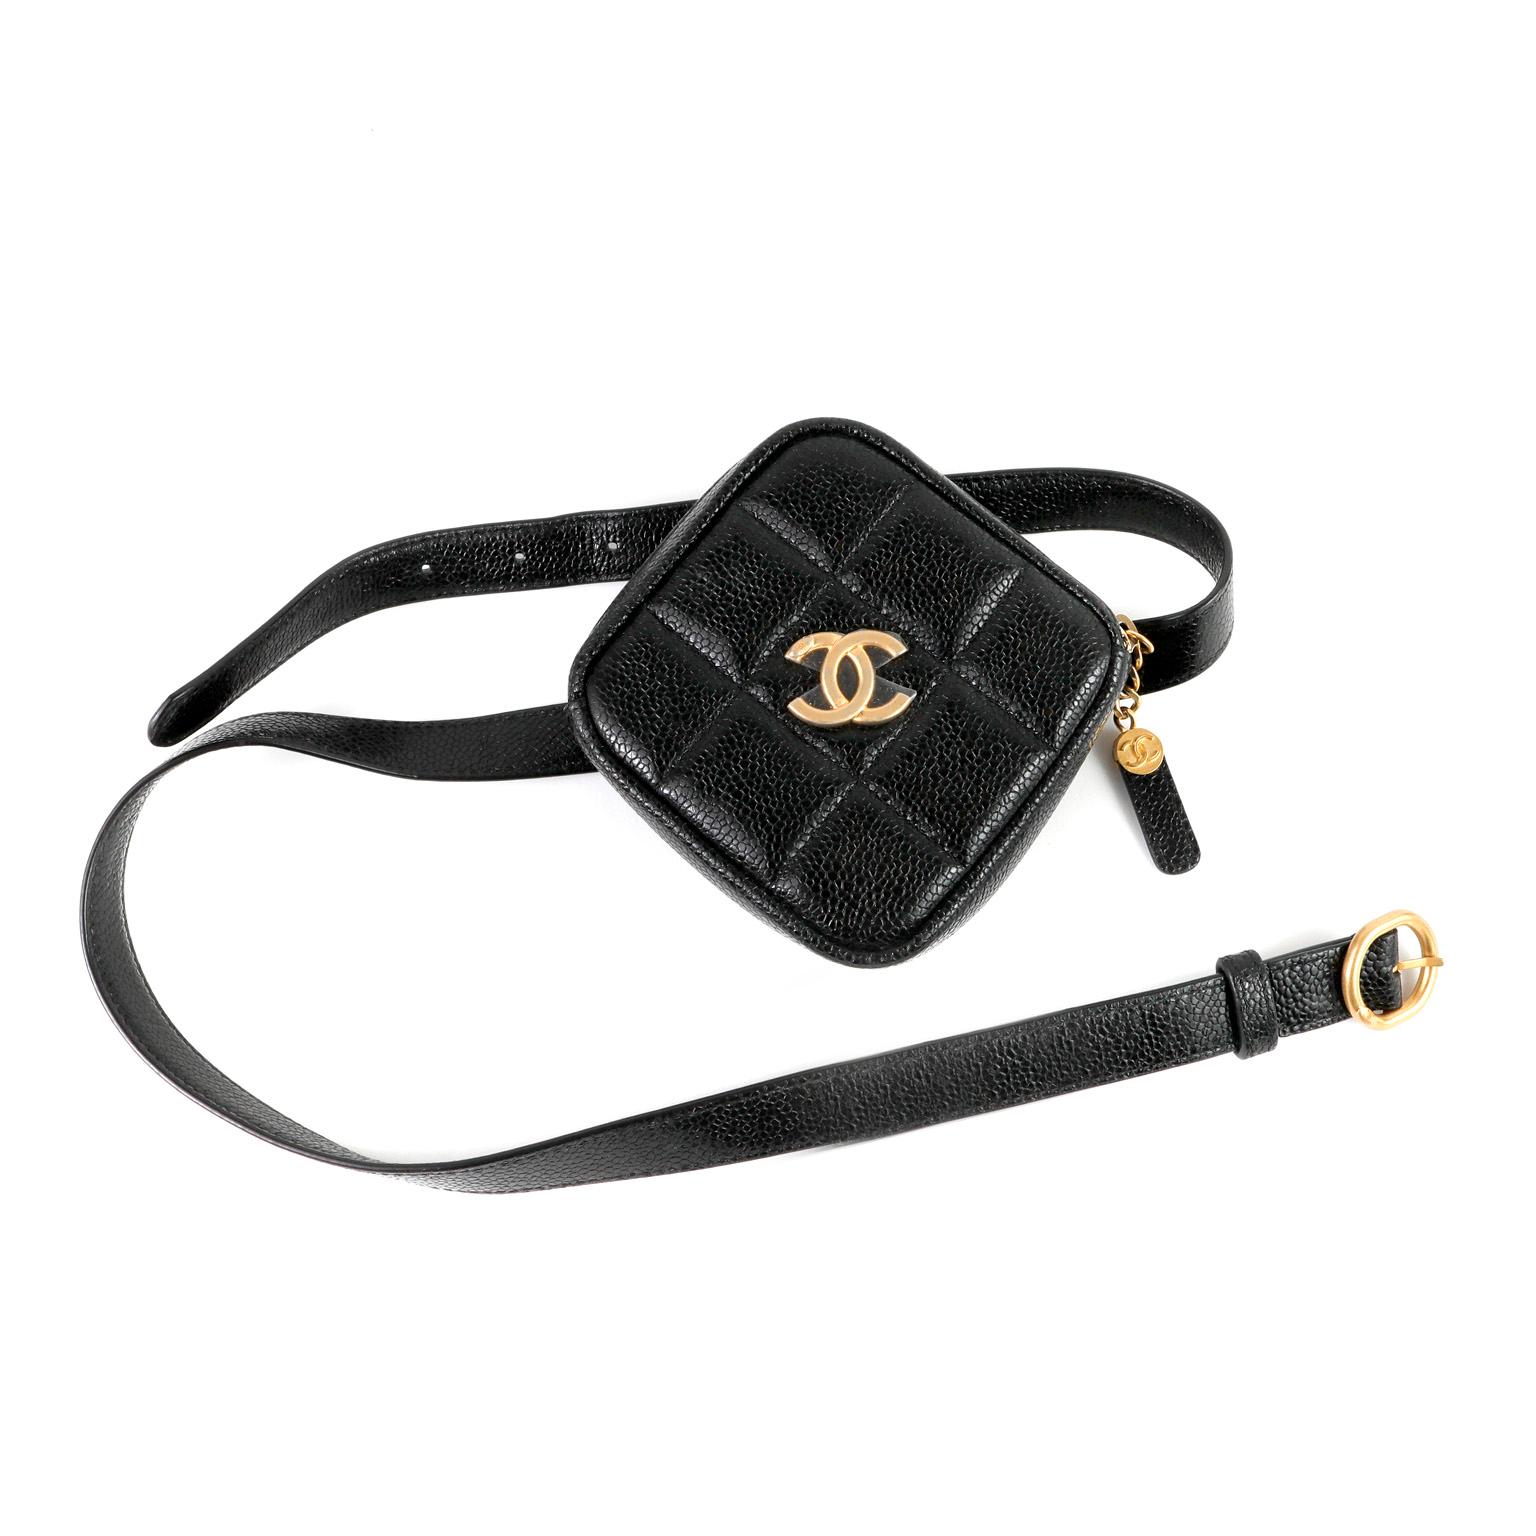 Chanel Black Caviar Leather Belt Bag In Excellent Condition For Sale In Palm Beach, FL